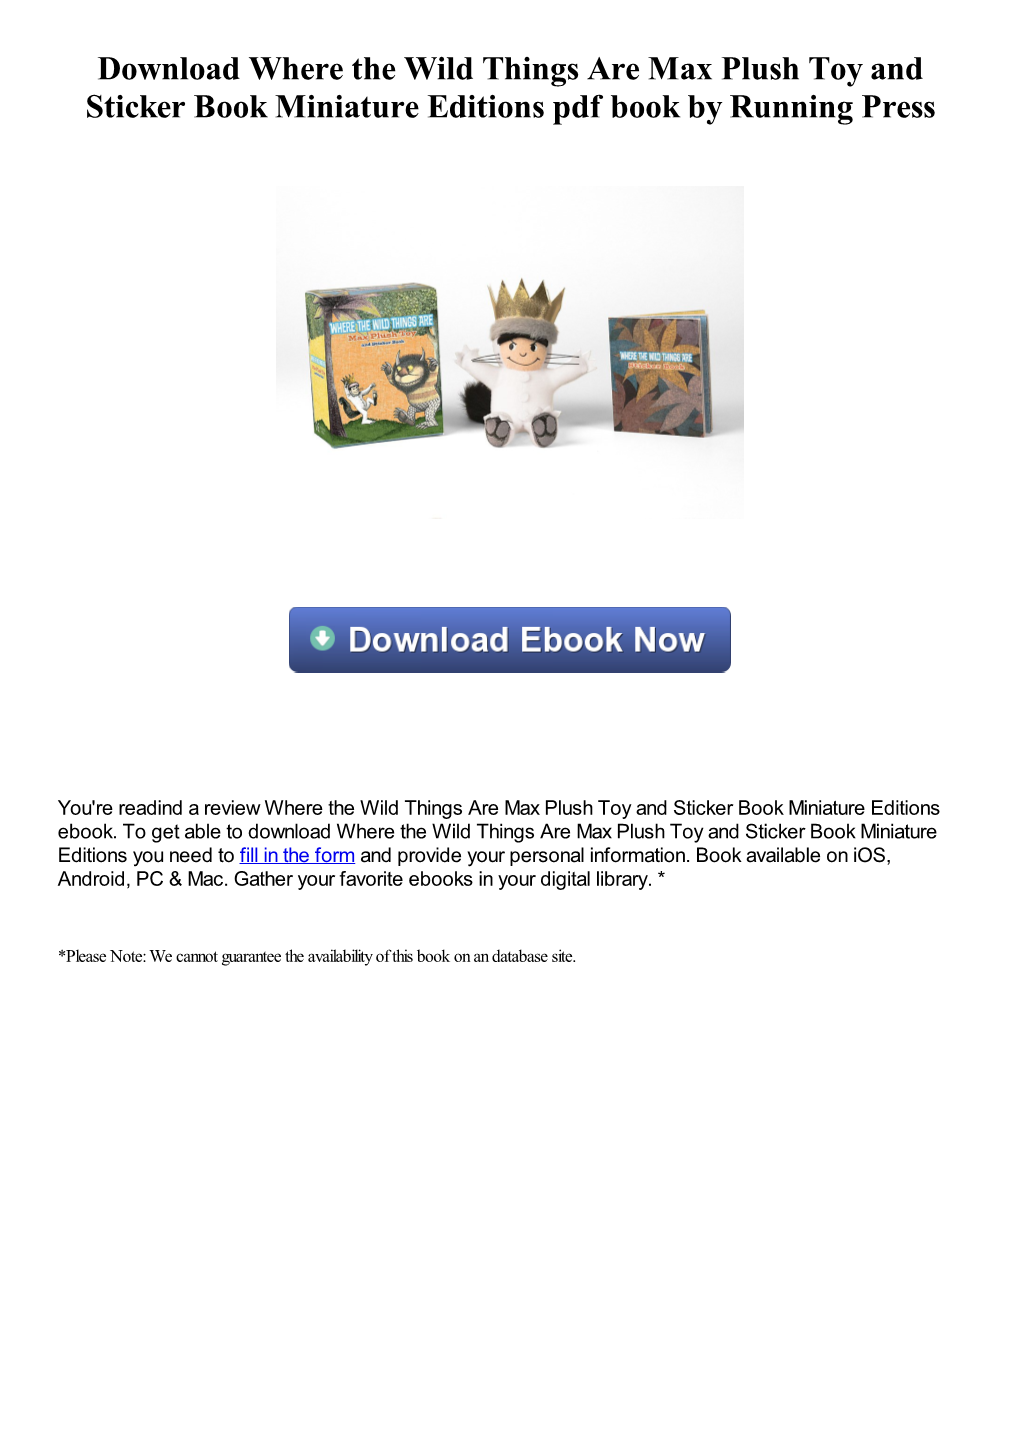 Download Where the Wild Things Are Max Plush Toy and Sticker Book Miniature Editions Pdf Book by Running Press